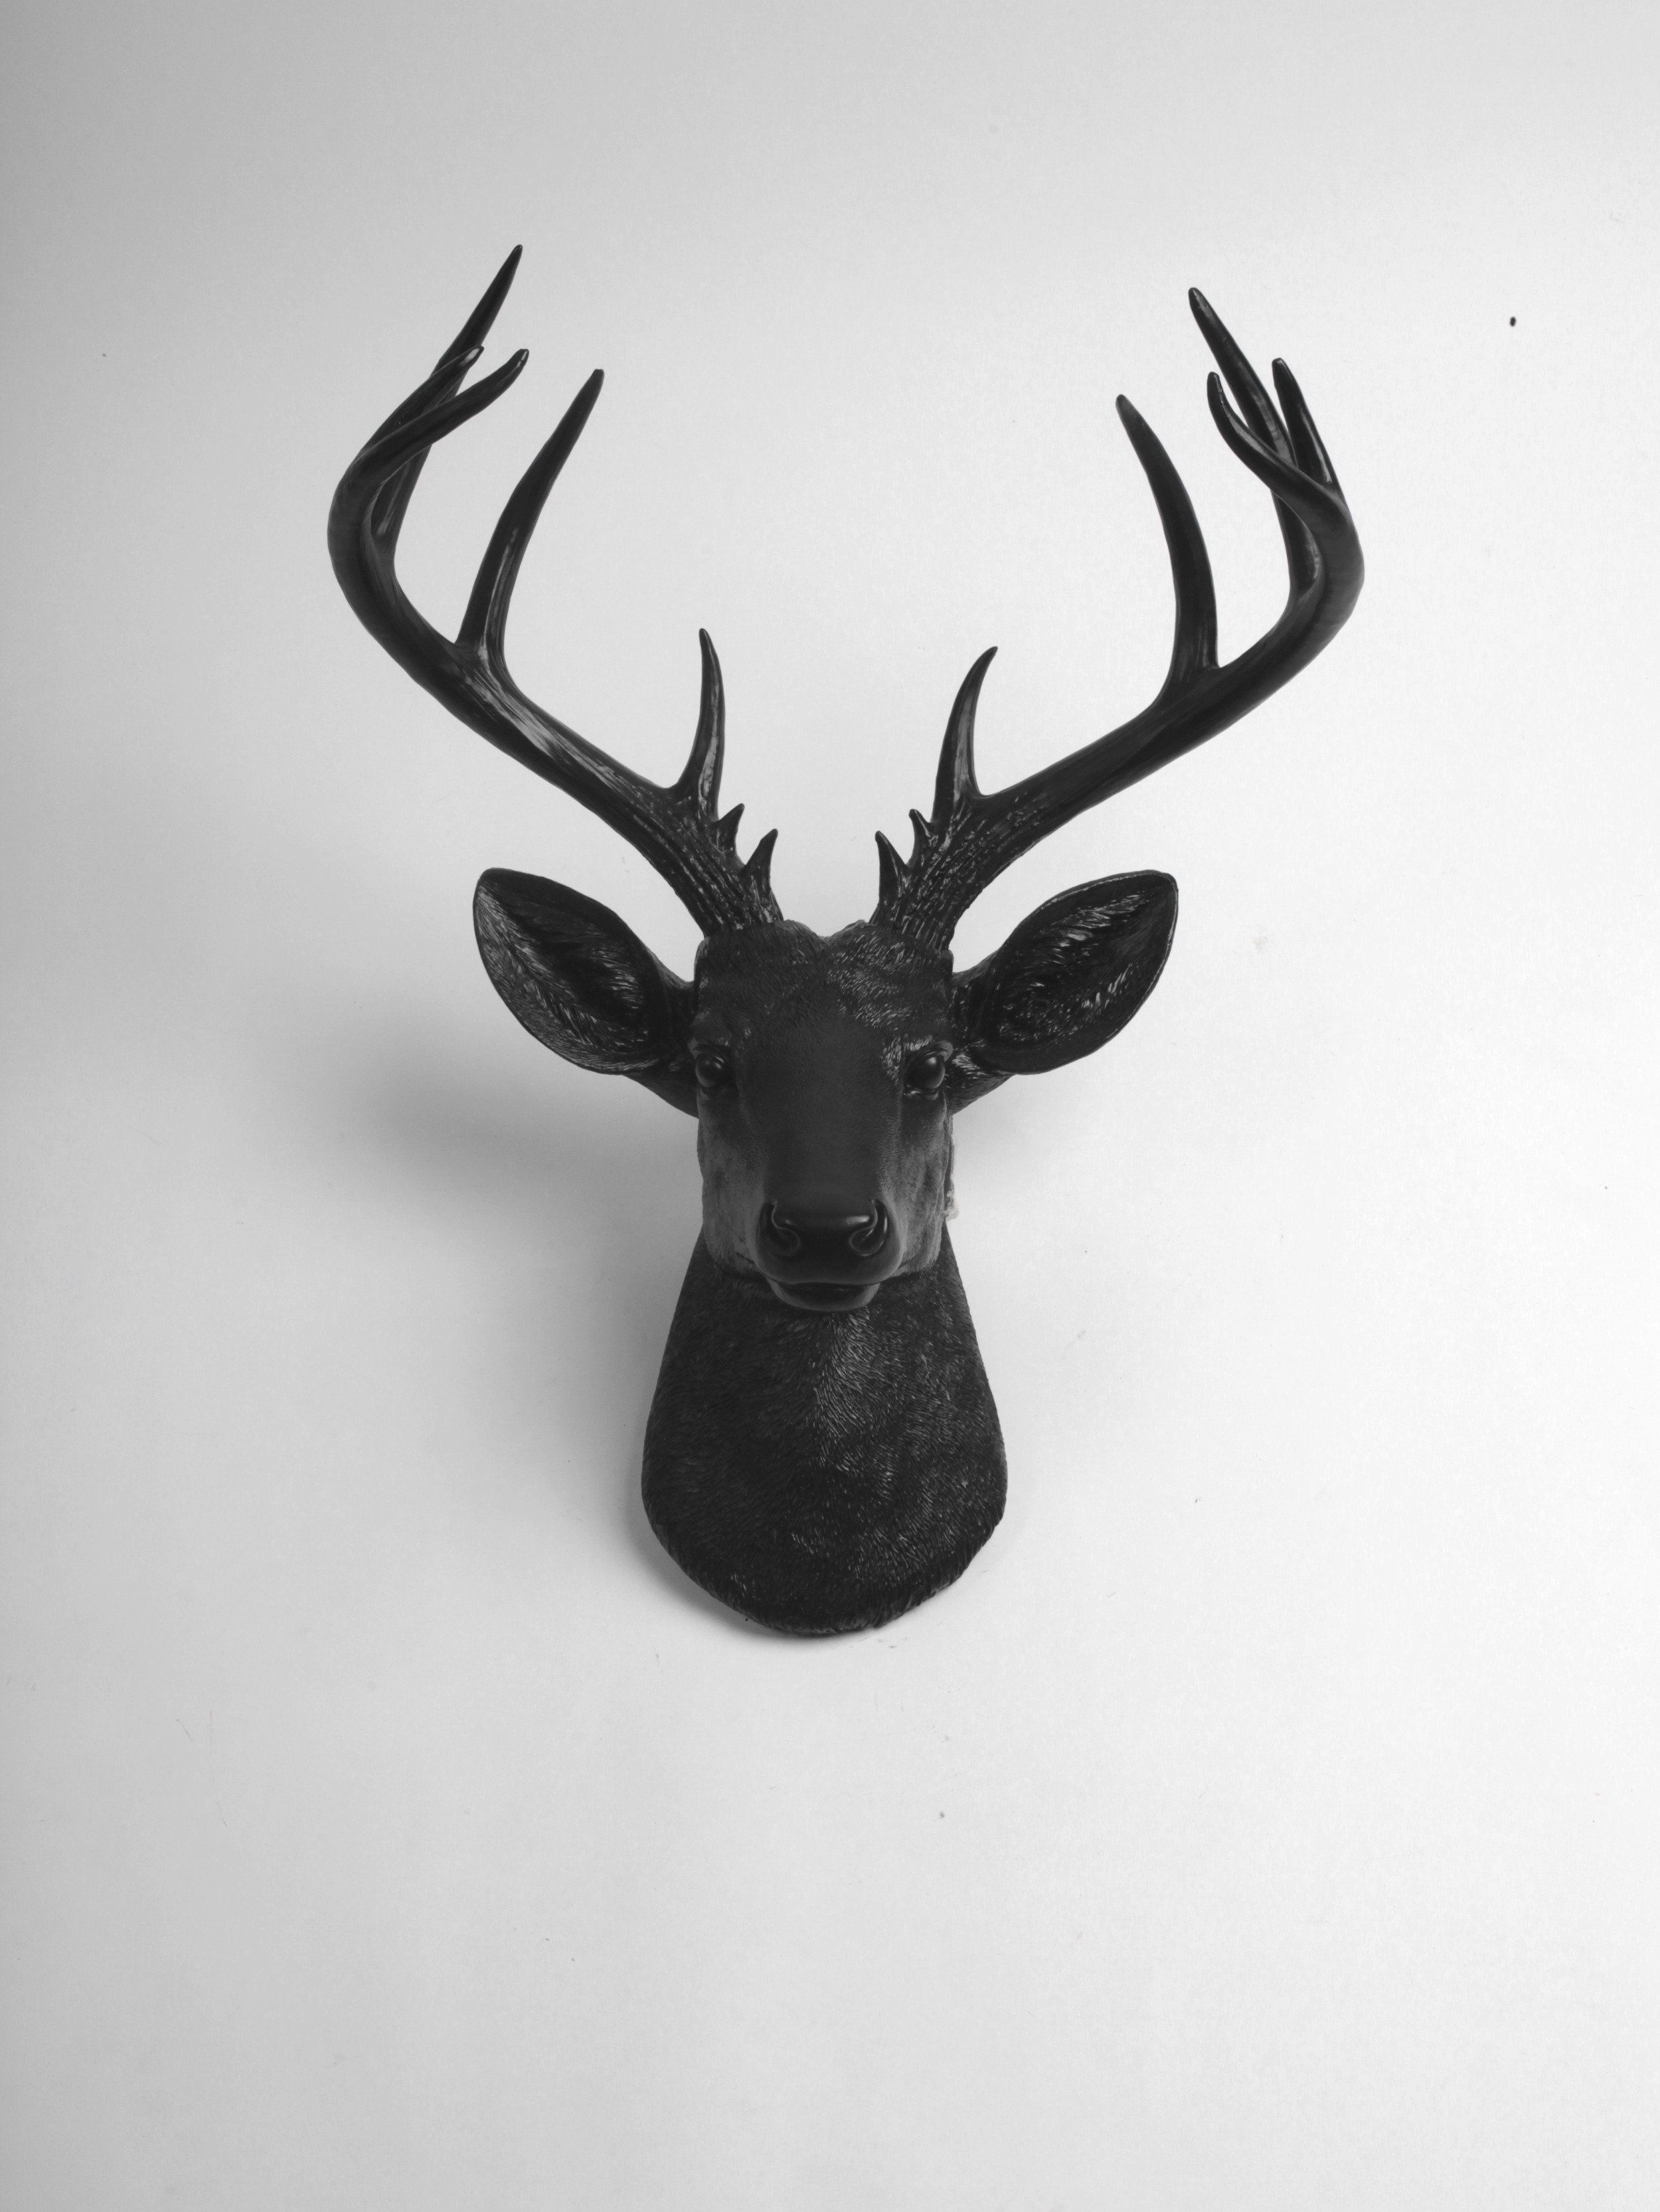 The Xl Ignatius, Stag Deer Head Wall Mount, Black Resin | My Throughout Large Deer Head Faux Taxidermy Wall Decor (View 9 of 30)